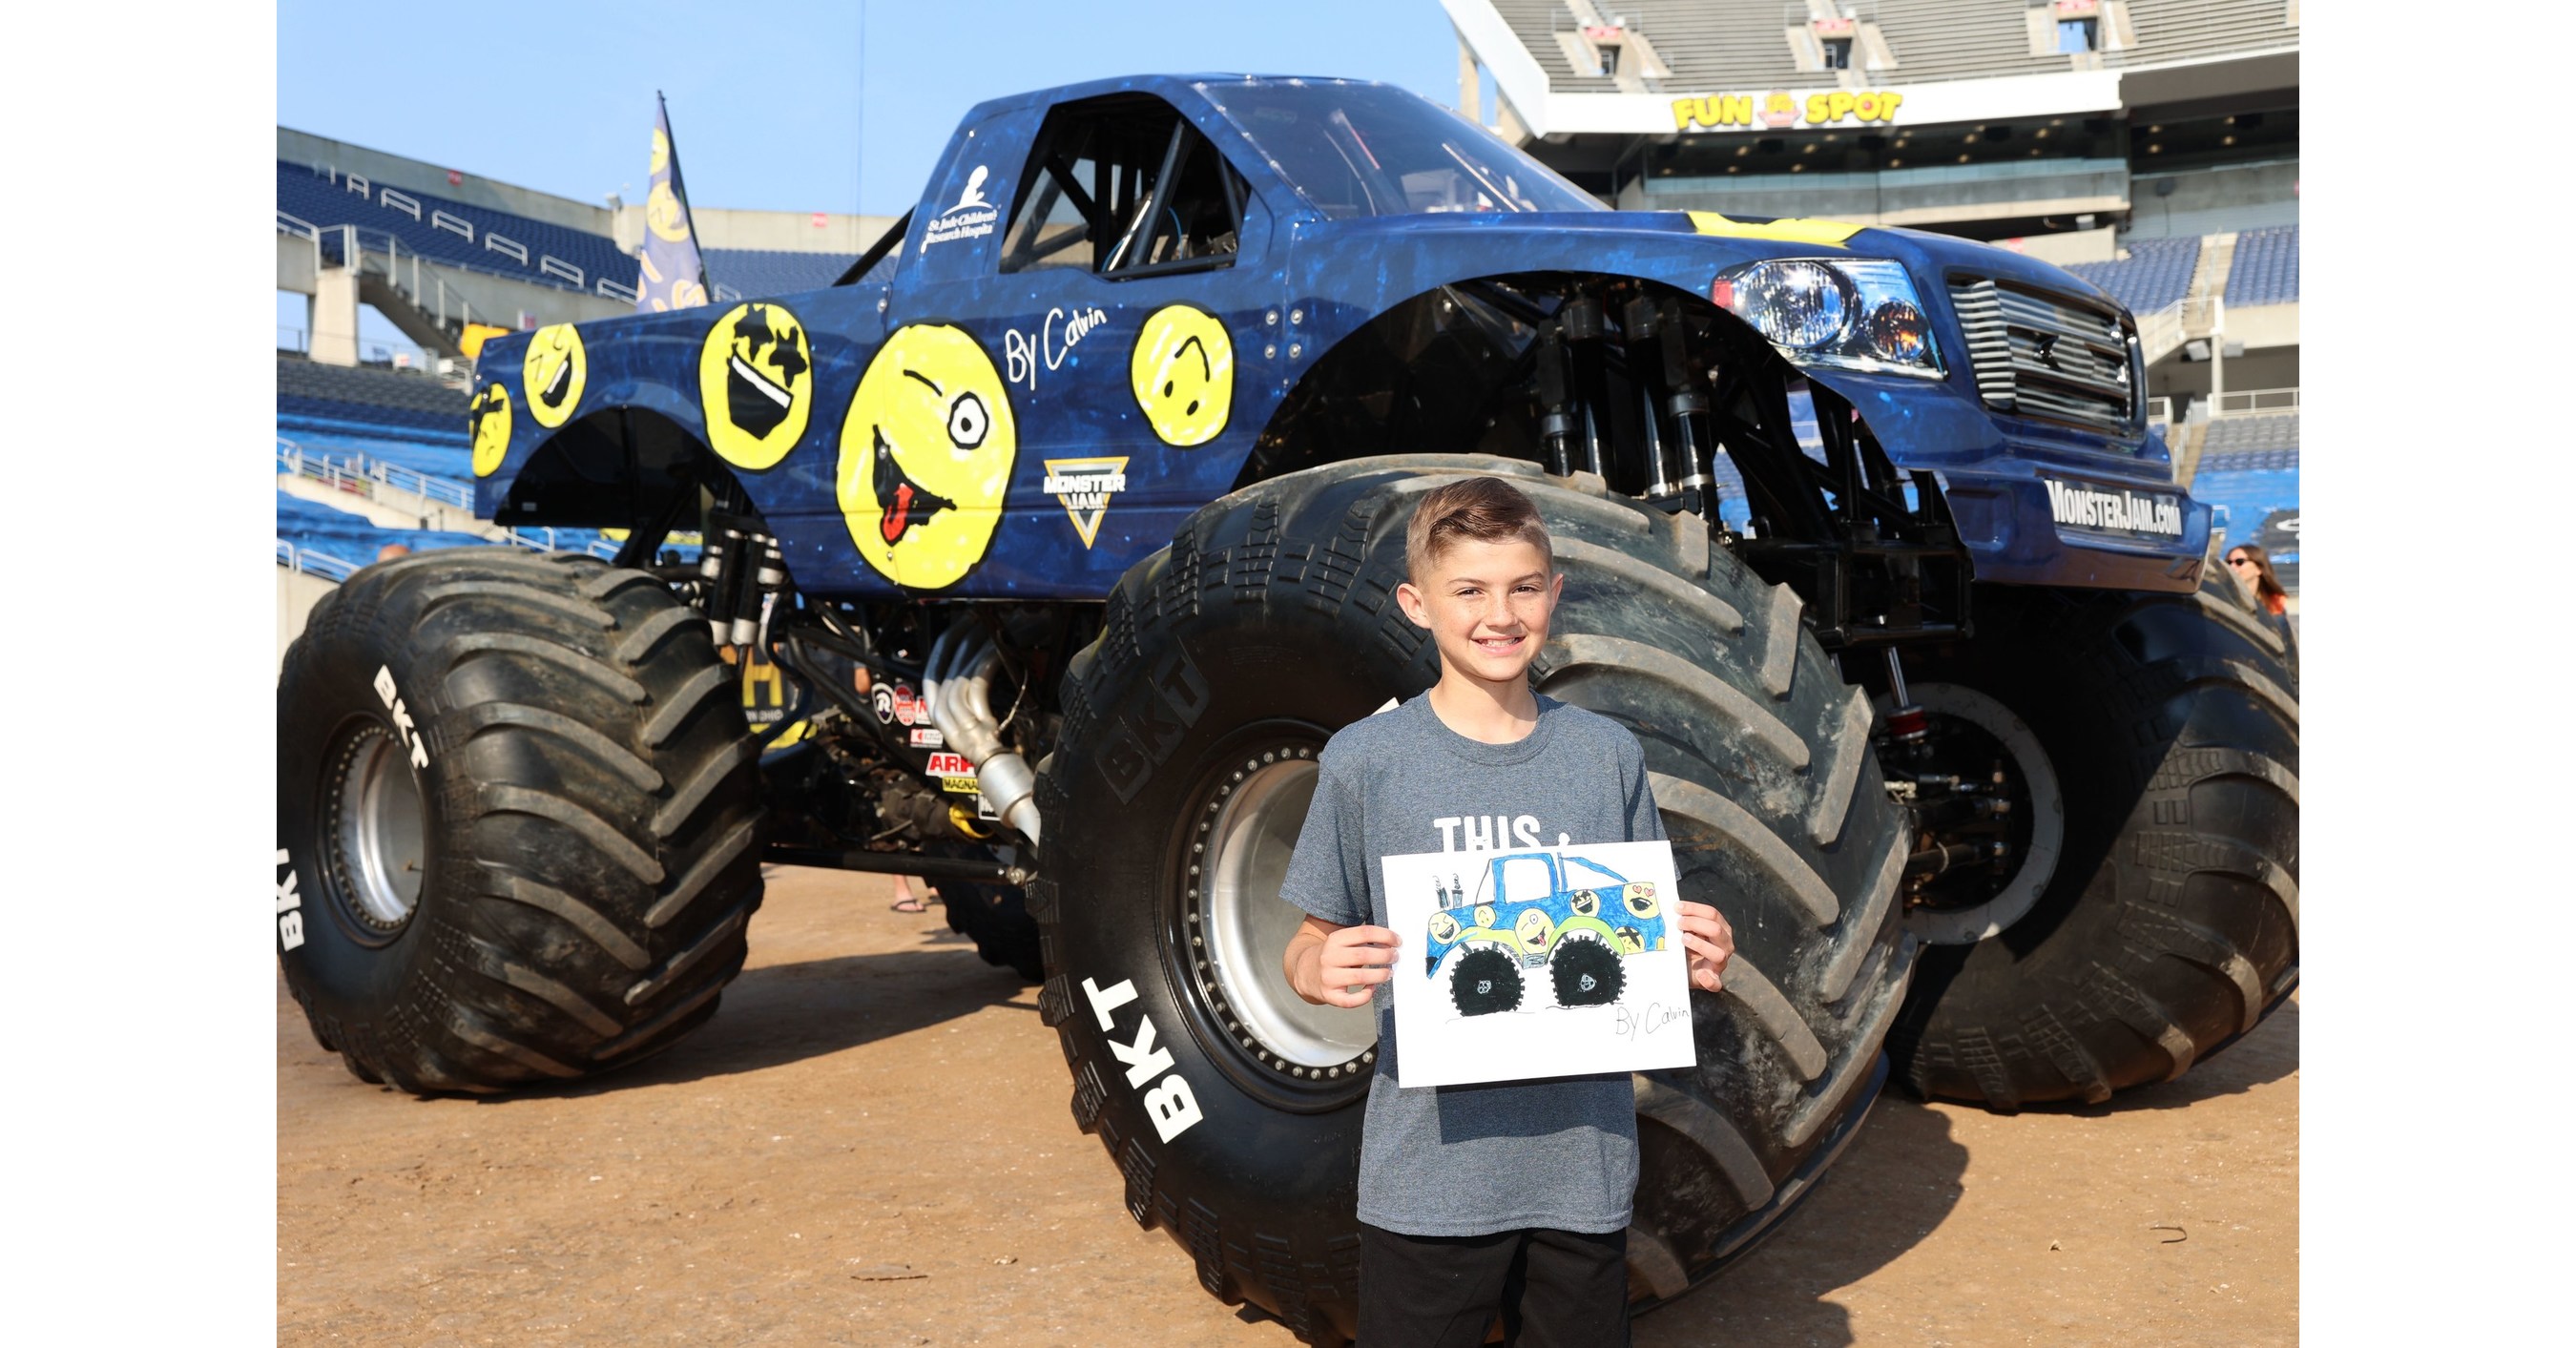 Monster Jam 2021 - COVID Safe With Feld Entertainment - Frugal For Luxury